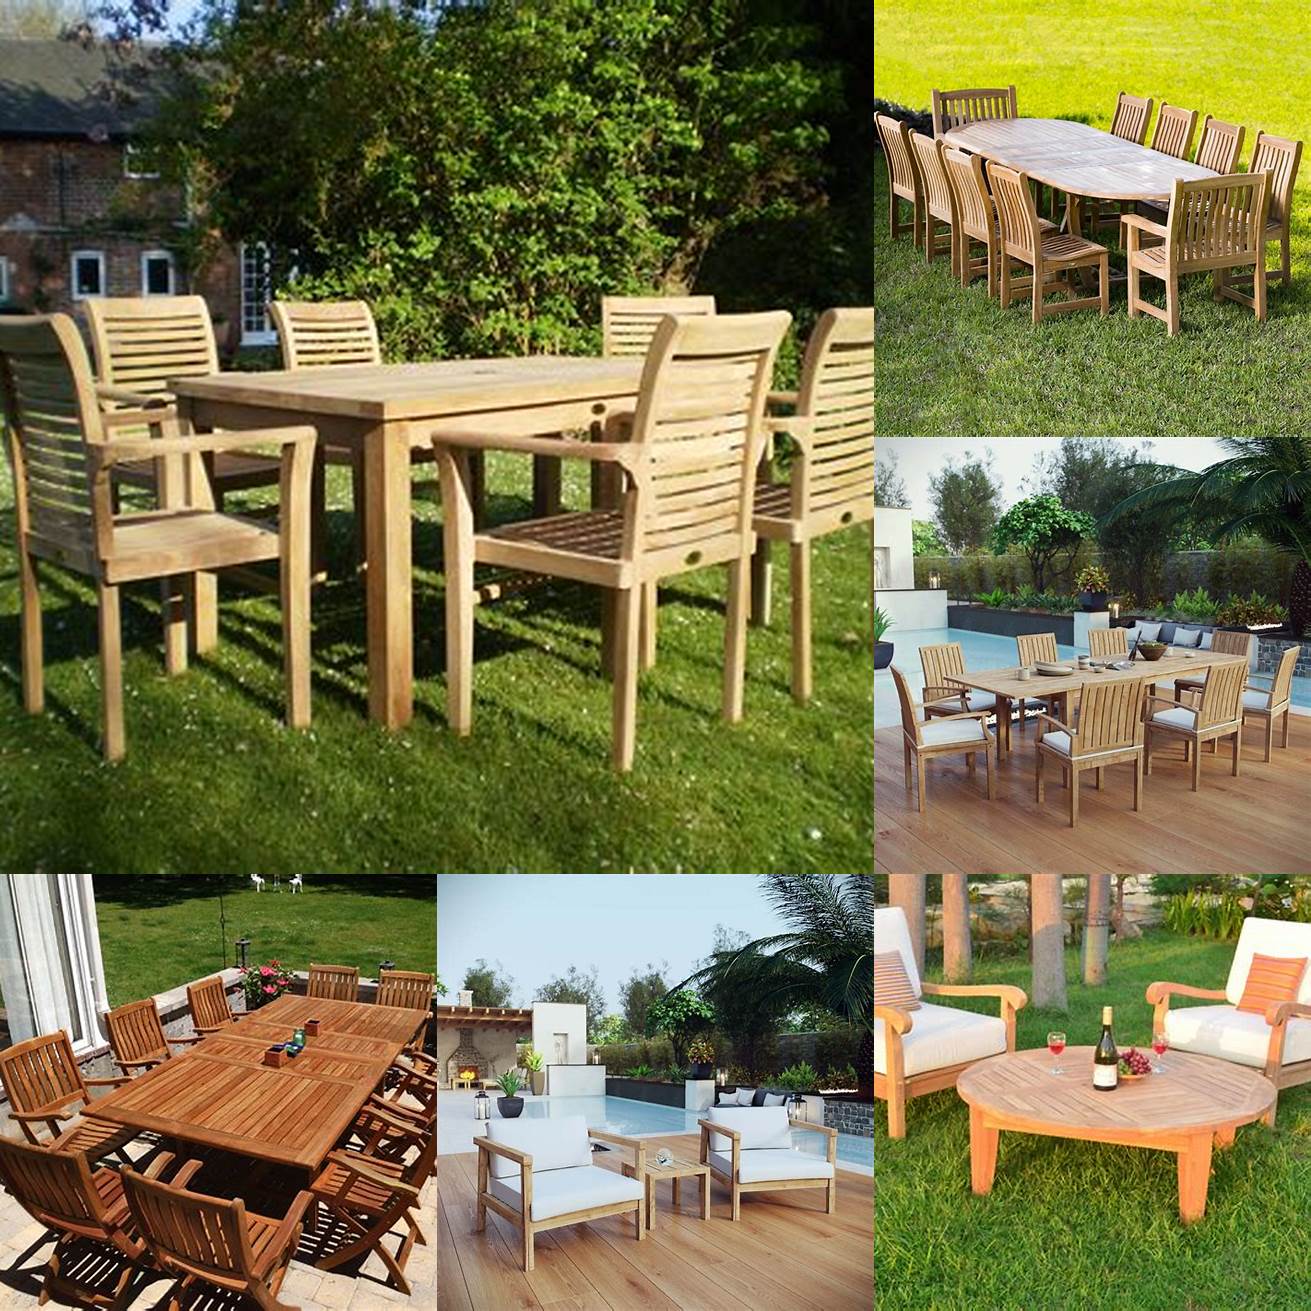 A picture of a plantation teak patio set in a backyard